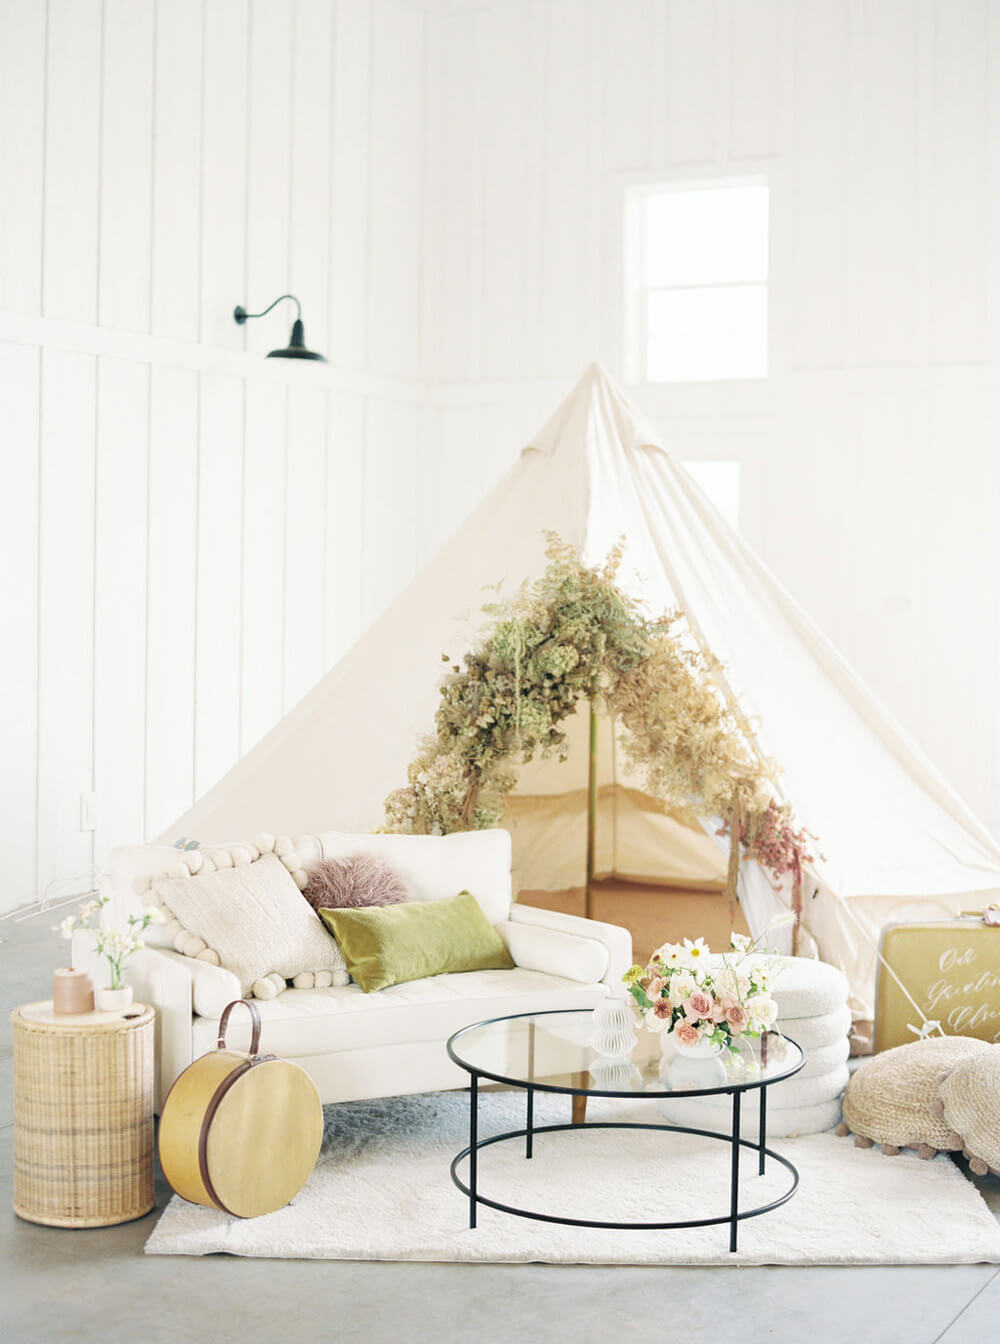 "Our Greatest Adventure Yet" neutral baby shower with floral teepee